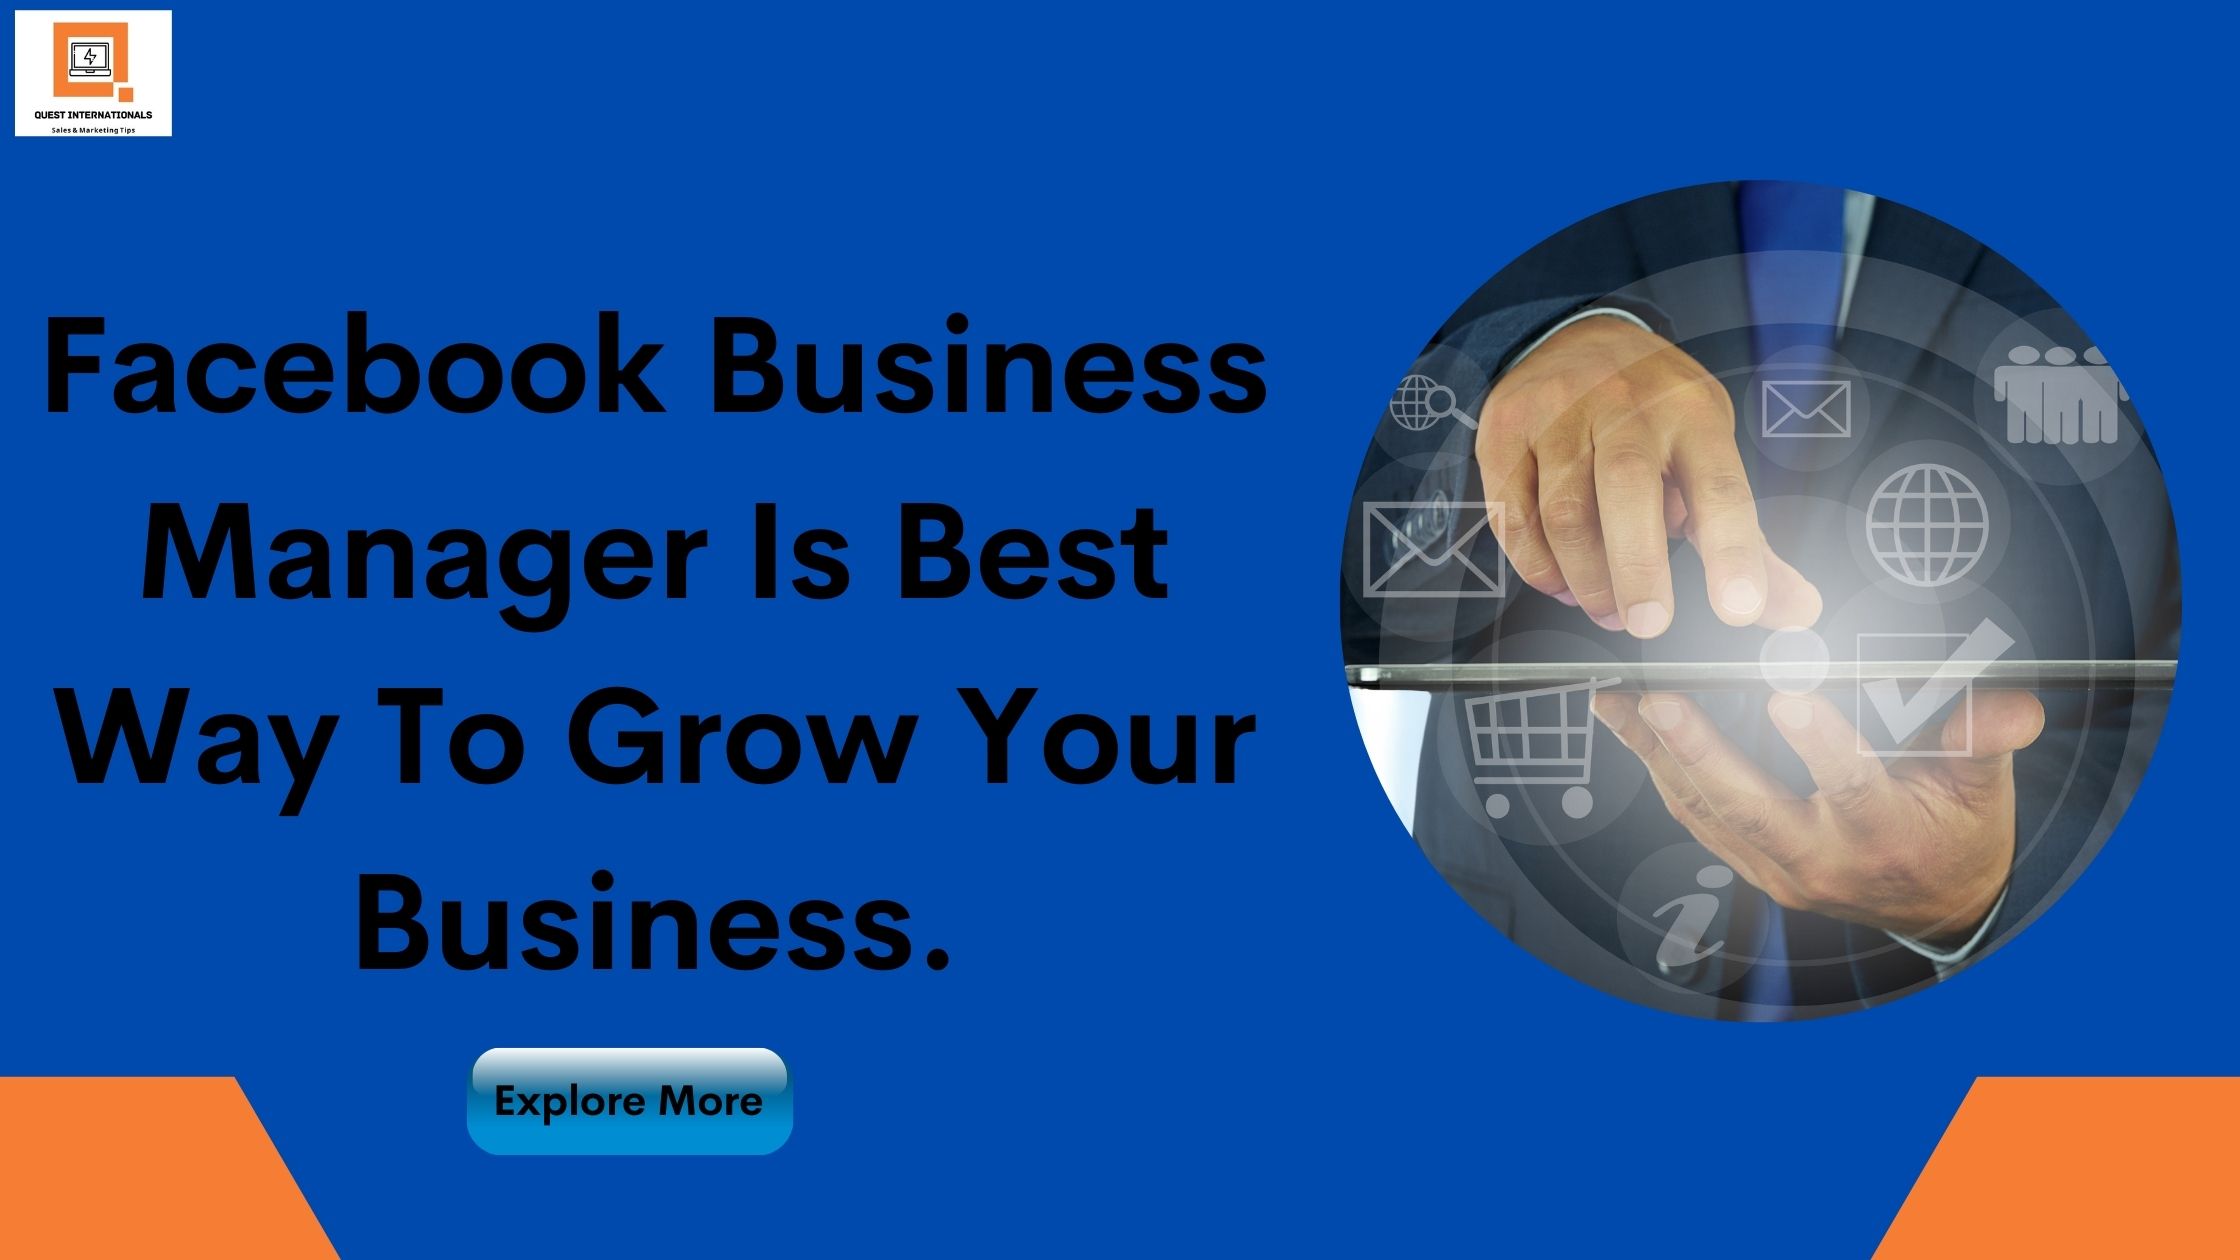 You are currently viewing Facebook Business Manager Is Best Way To Grow Your Business.